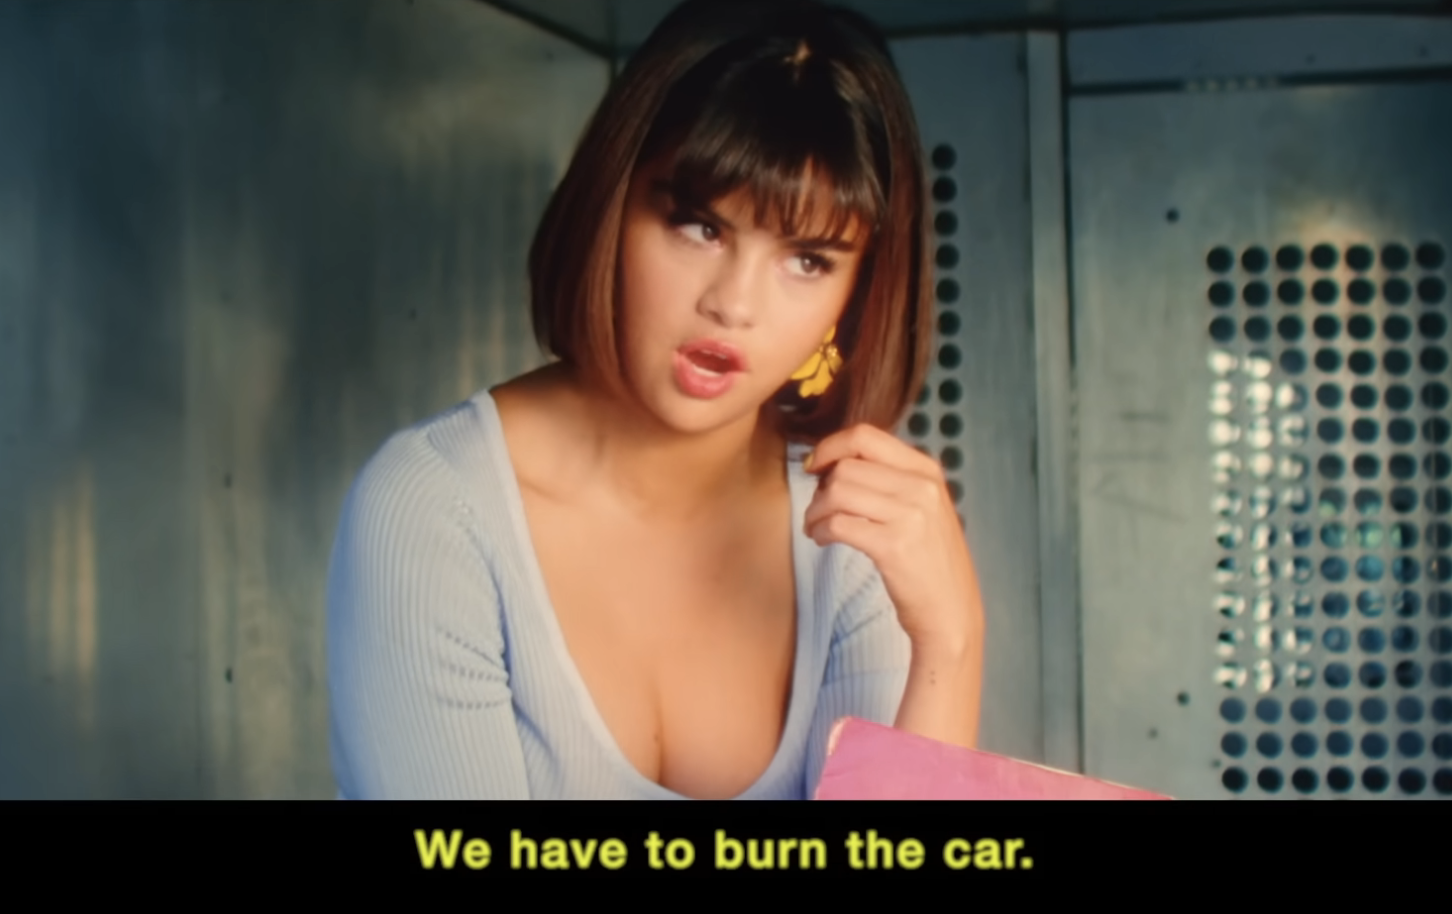 Selena Gomez in a music video scene, leaning against a car window with a vintage aesthetic and a lyric in a band along the bottom